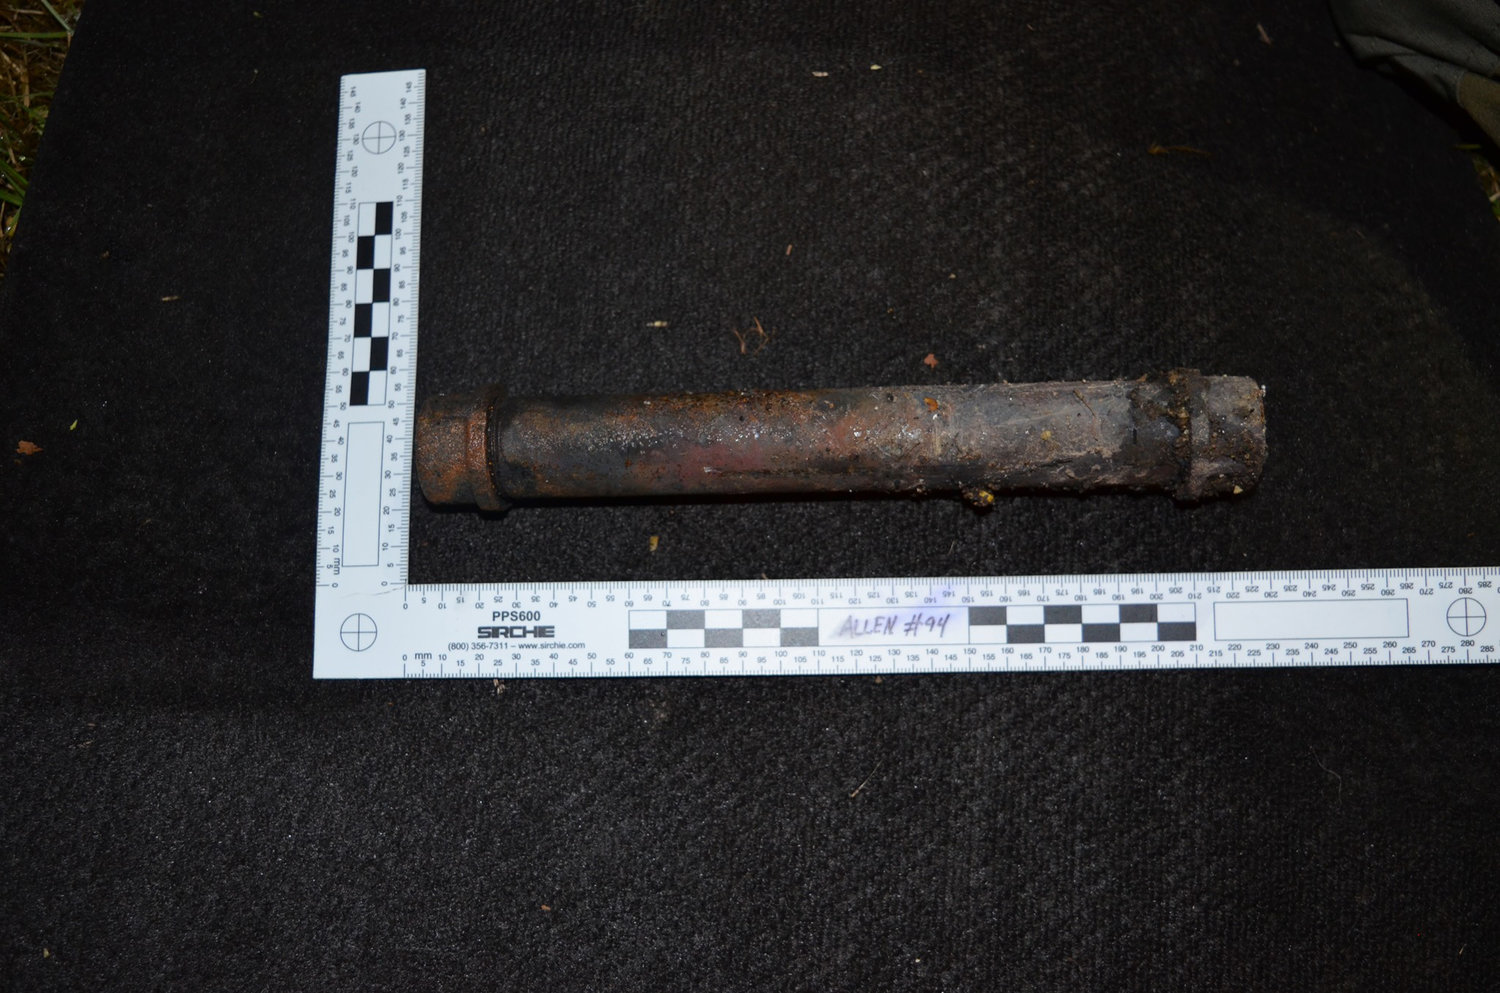 One of the homemade explosive devices recovered from a property Tuesday night in Port Hadlock.